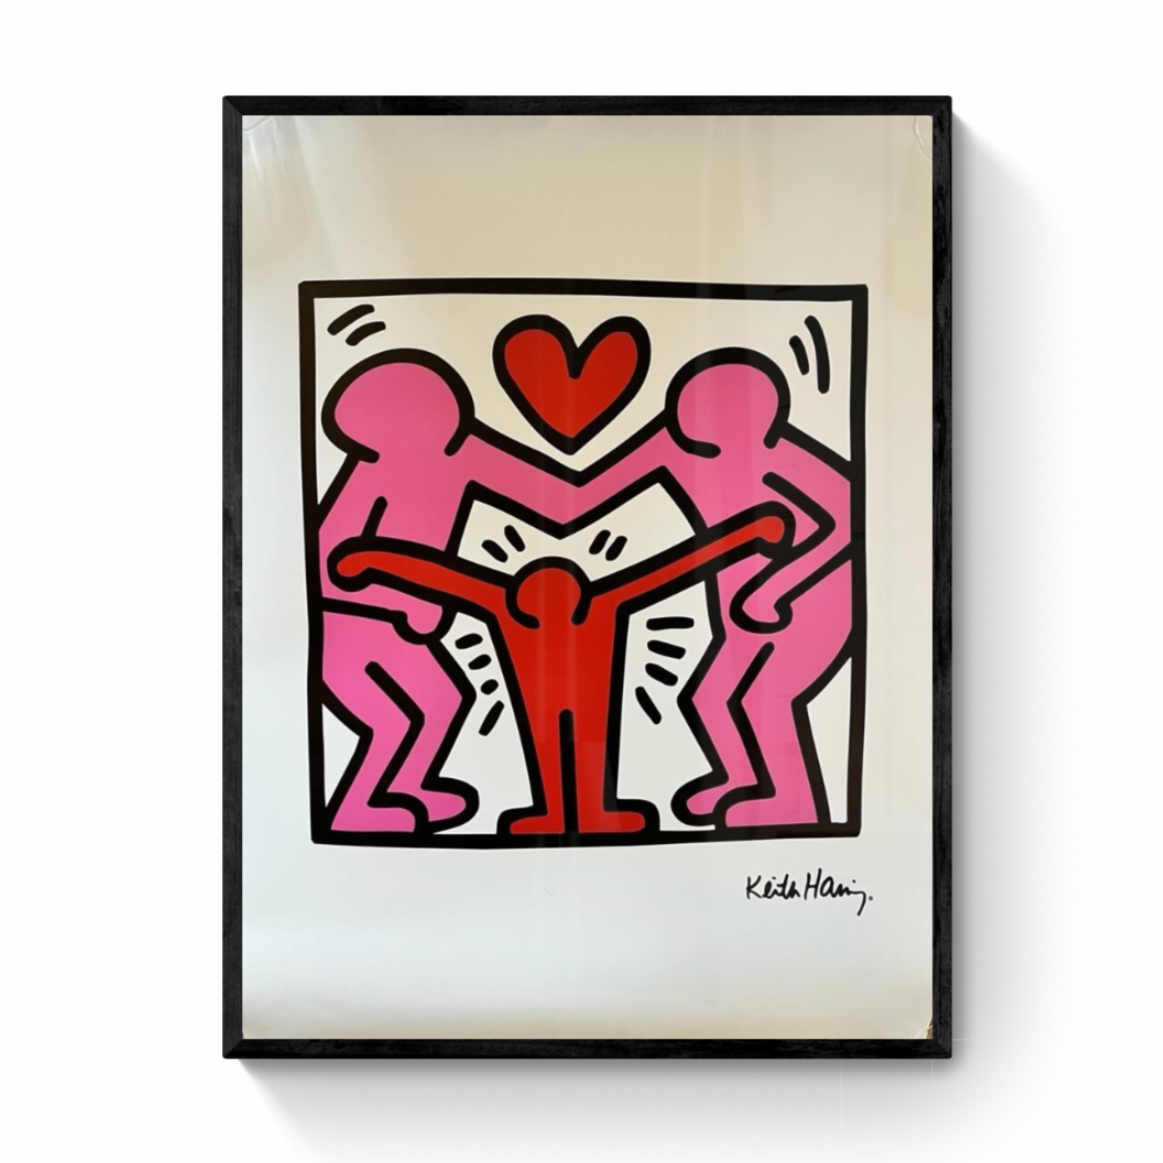 Official Poster - Keith Haring, Untitled (Family) - MocoMuseum (Strictly limited edition) - 2019